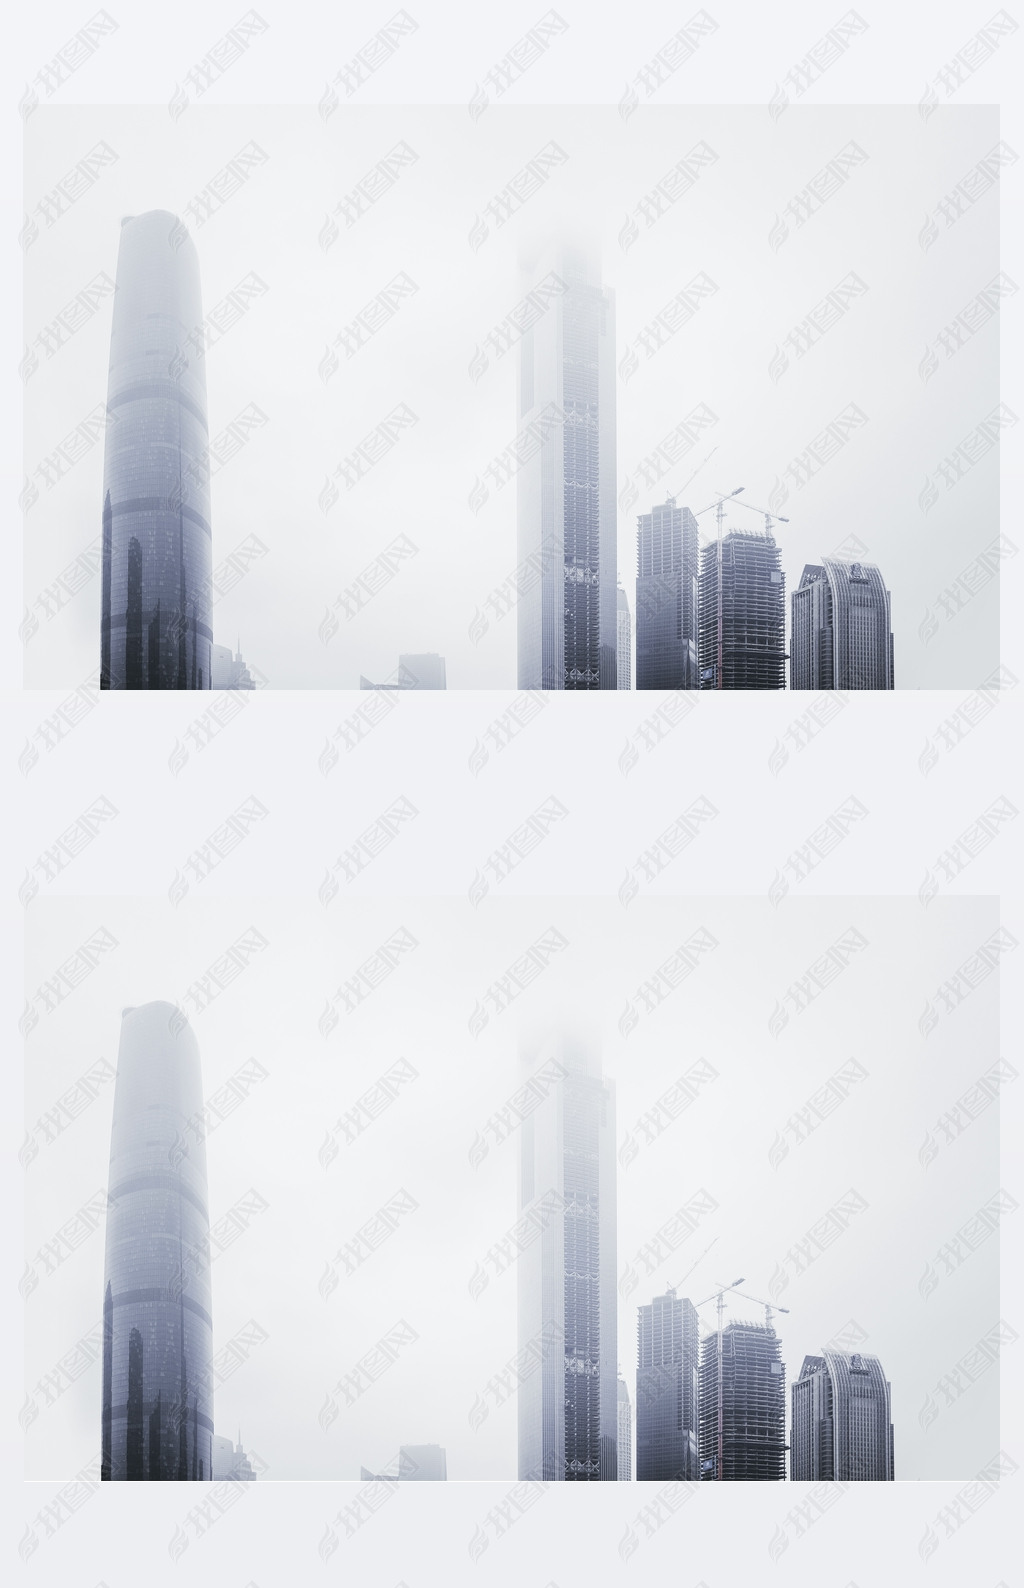 Skyscrapers of financial district in Guangzhou